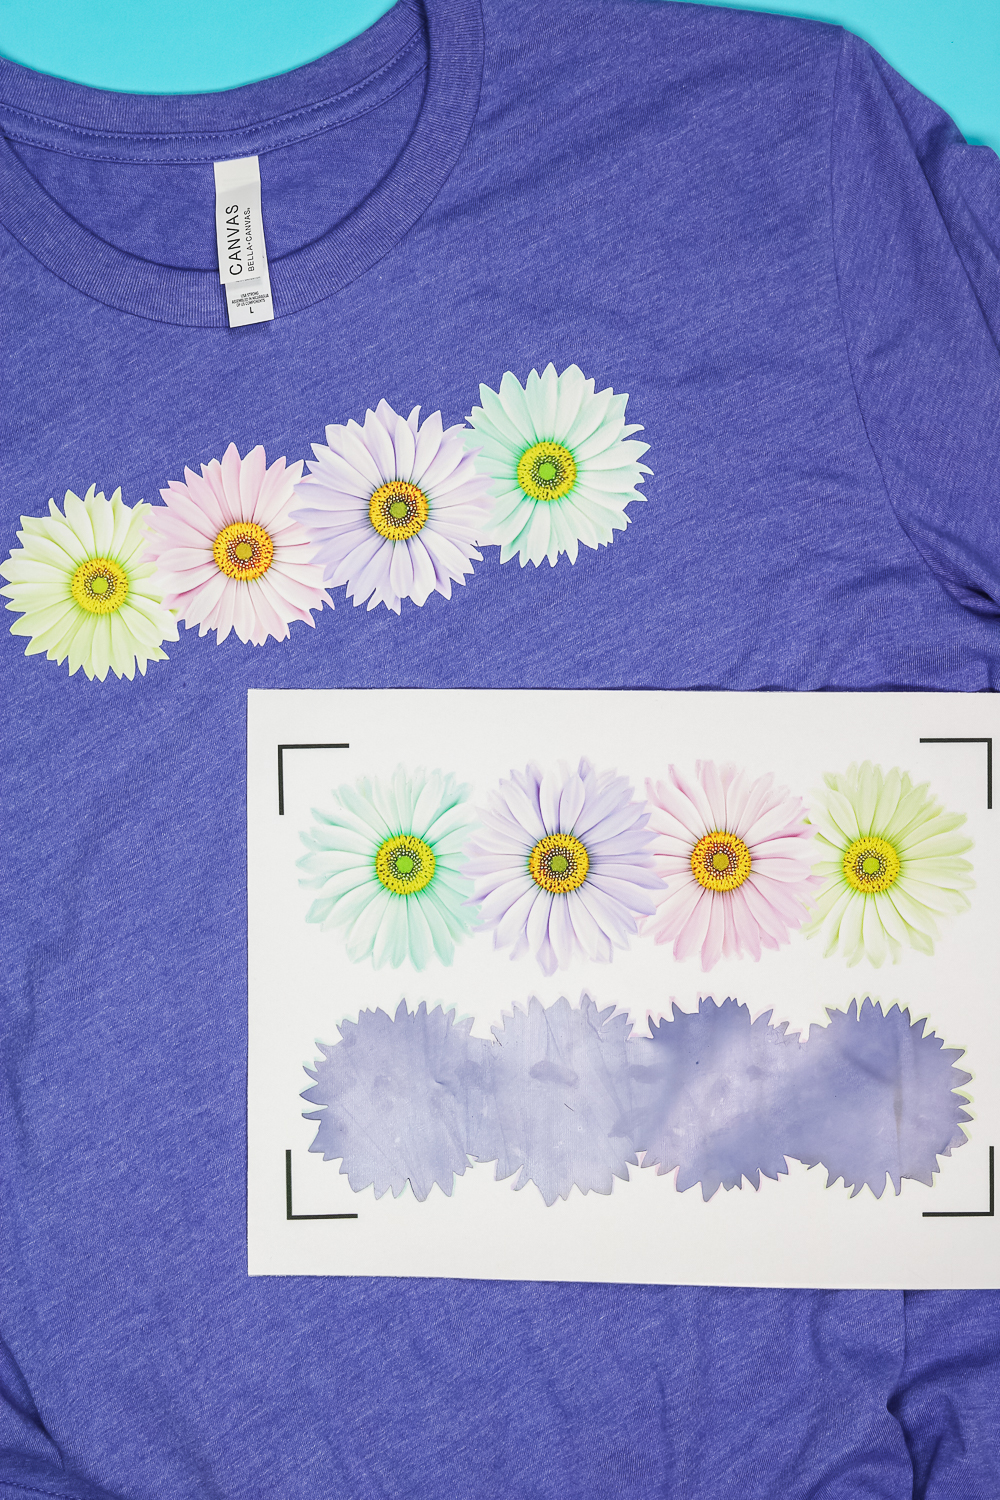 Sublimation on cotton with SubliTex header image.